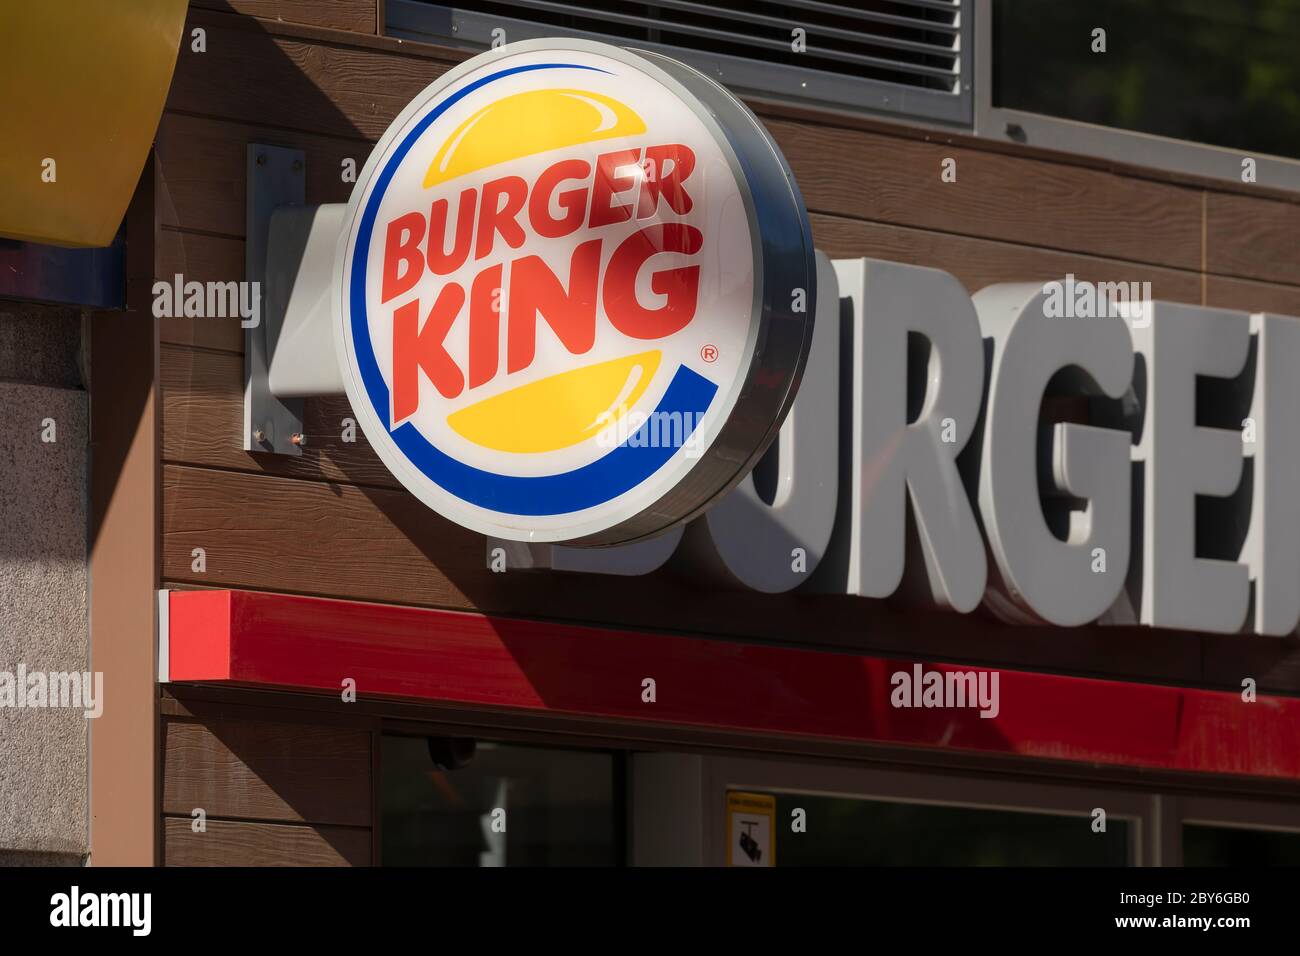 Madrid, Spain - May 18, 2020: Main access area to the fast food and hamburger restaurant, Burger King, in the Retiro district, Ibiza street. Stock Photo